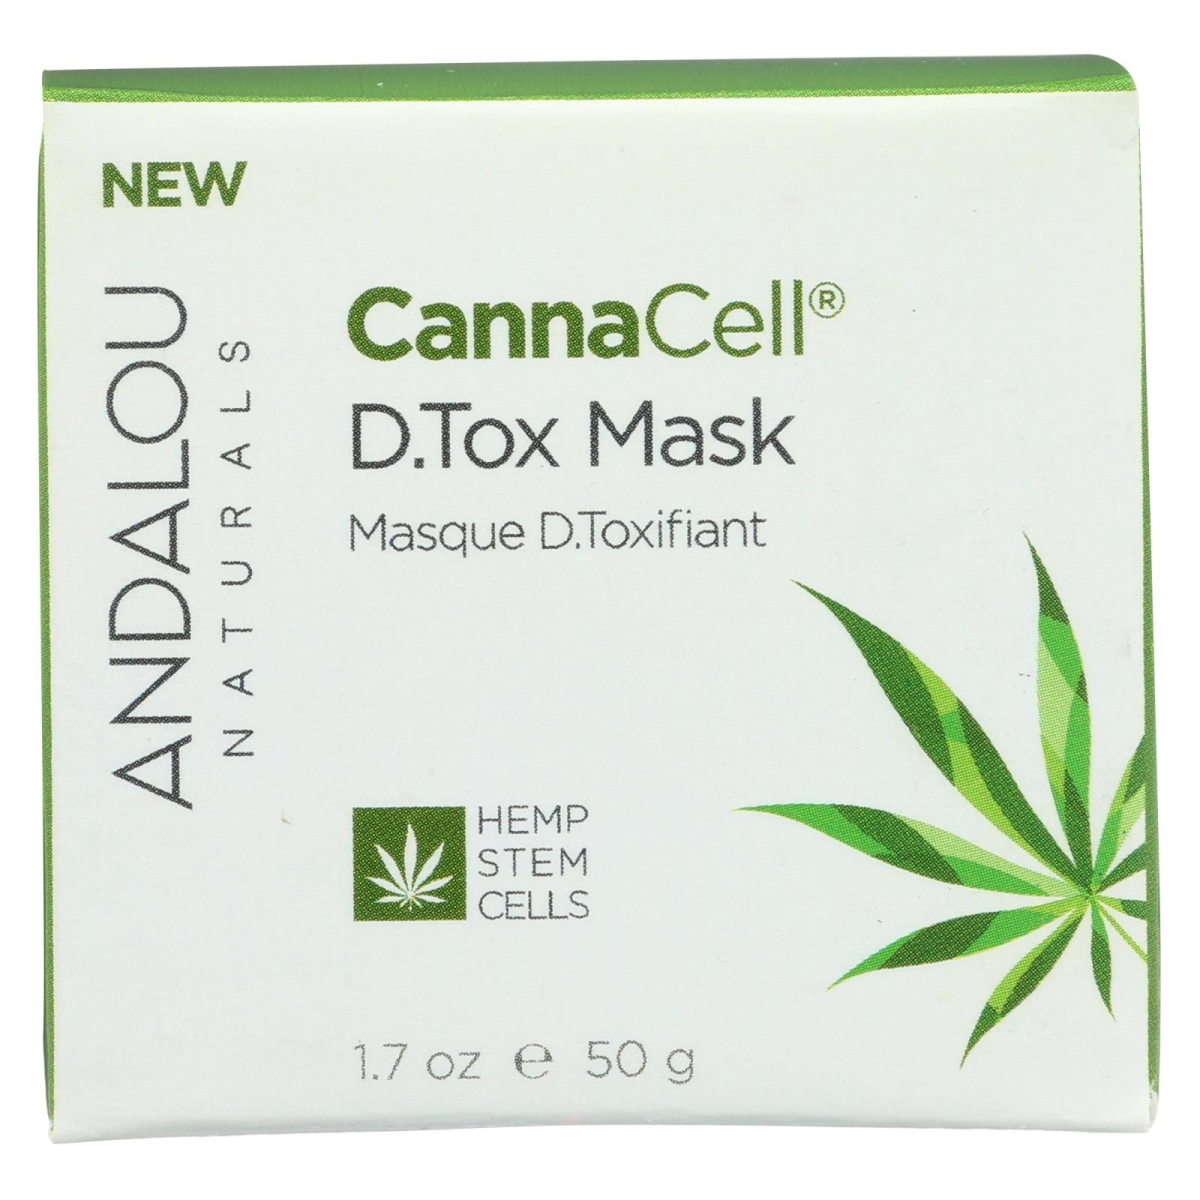 Picture of Andalou Naturals HG2292894 1.7 oz Cannacell D.Tox Mask